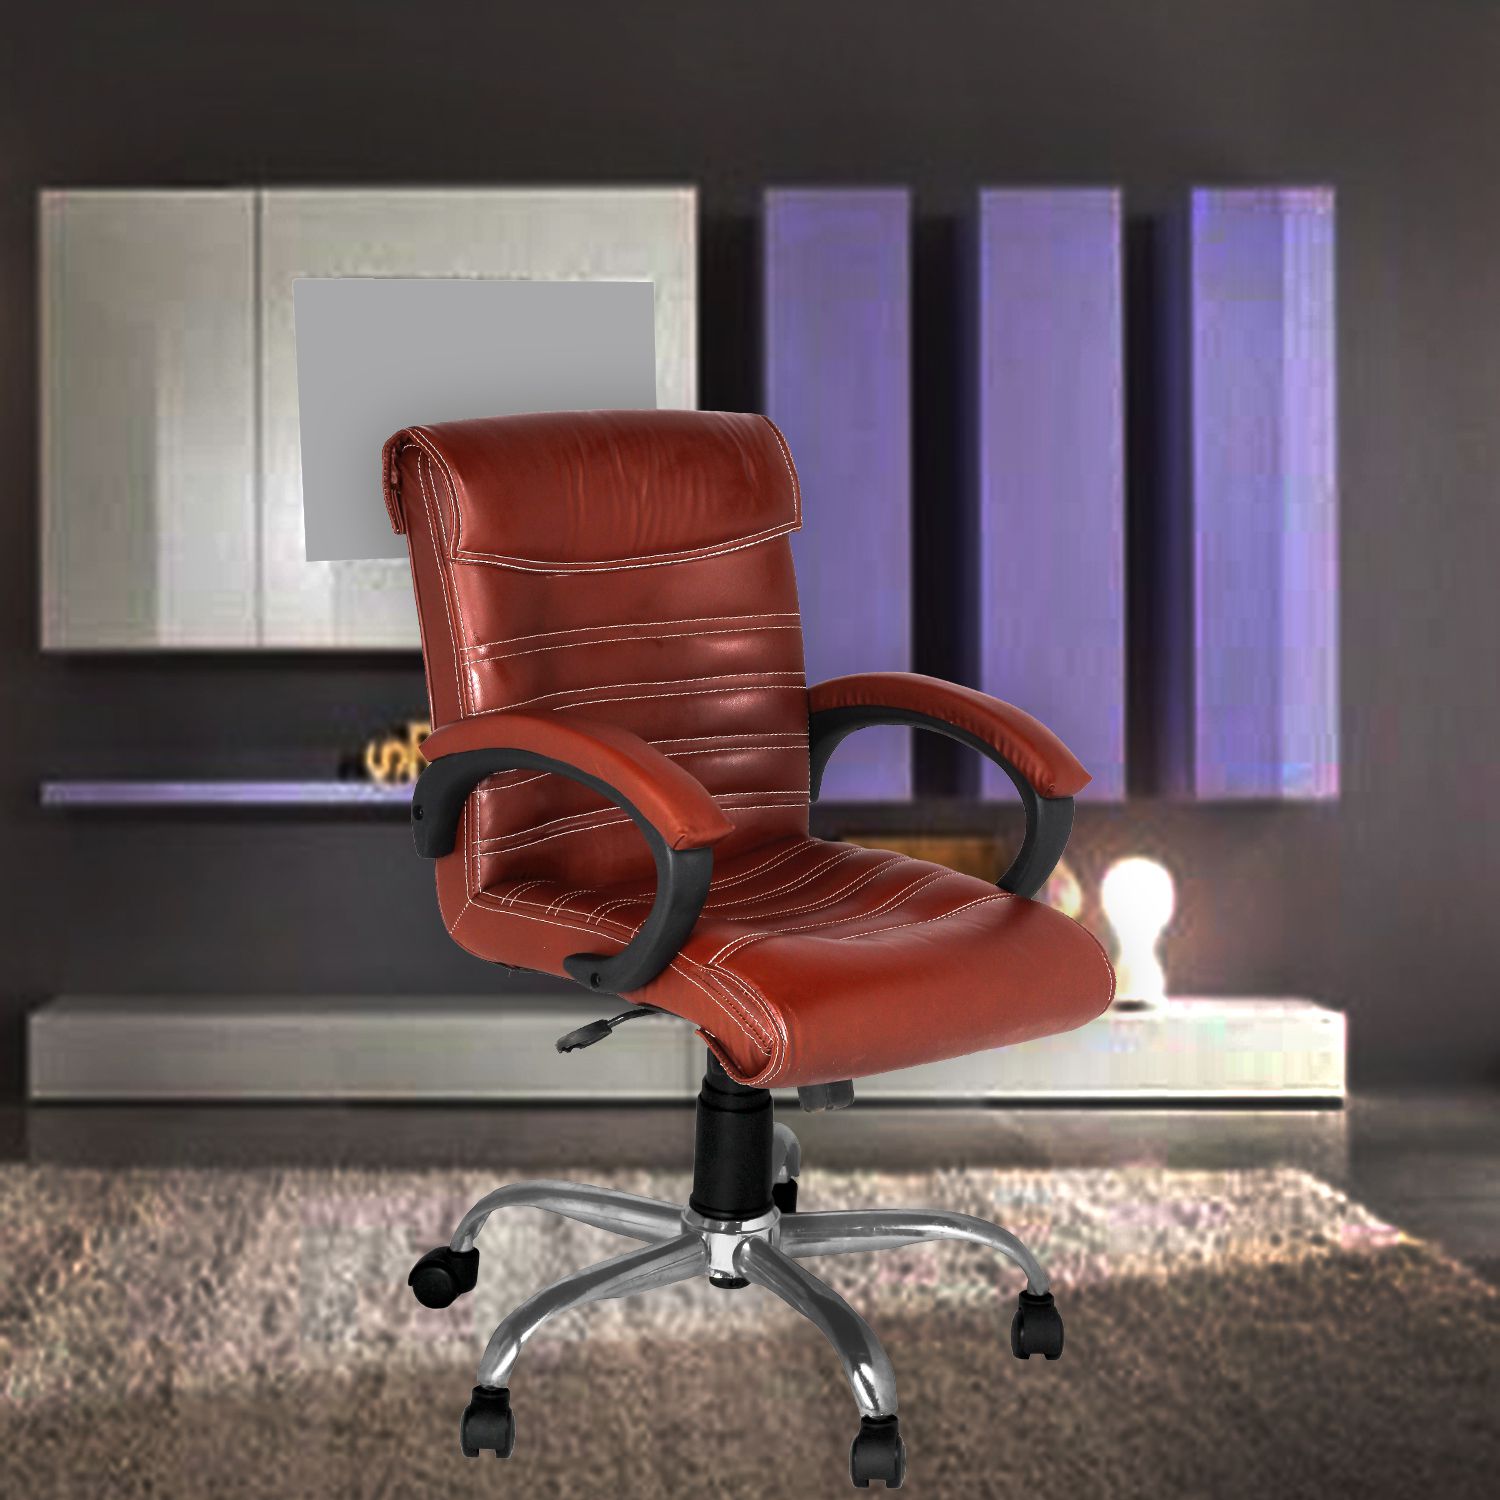 MARS LOW BACK OFFICE CHAIR BUY TWO AT PRICE OF ONE - Buy MARS LOW BACK